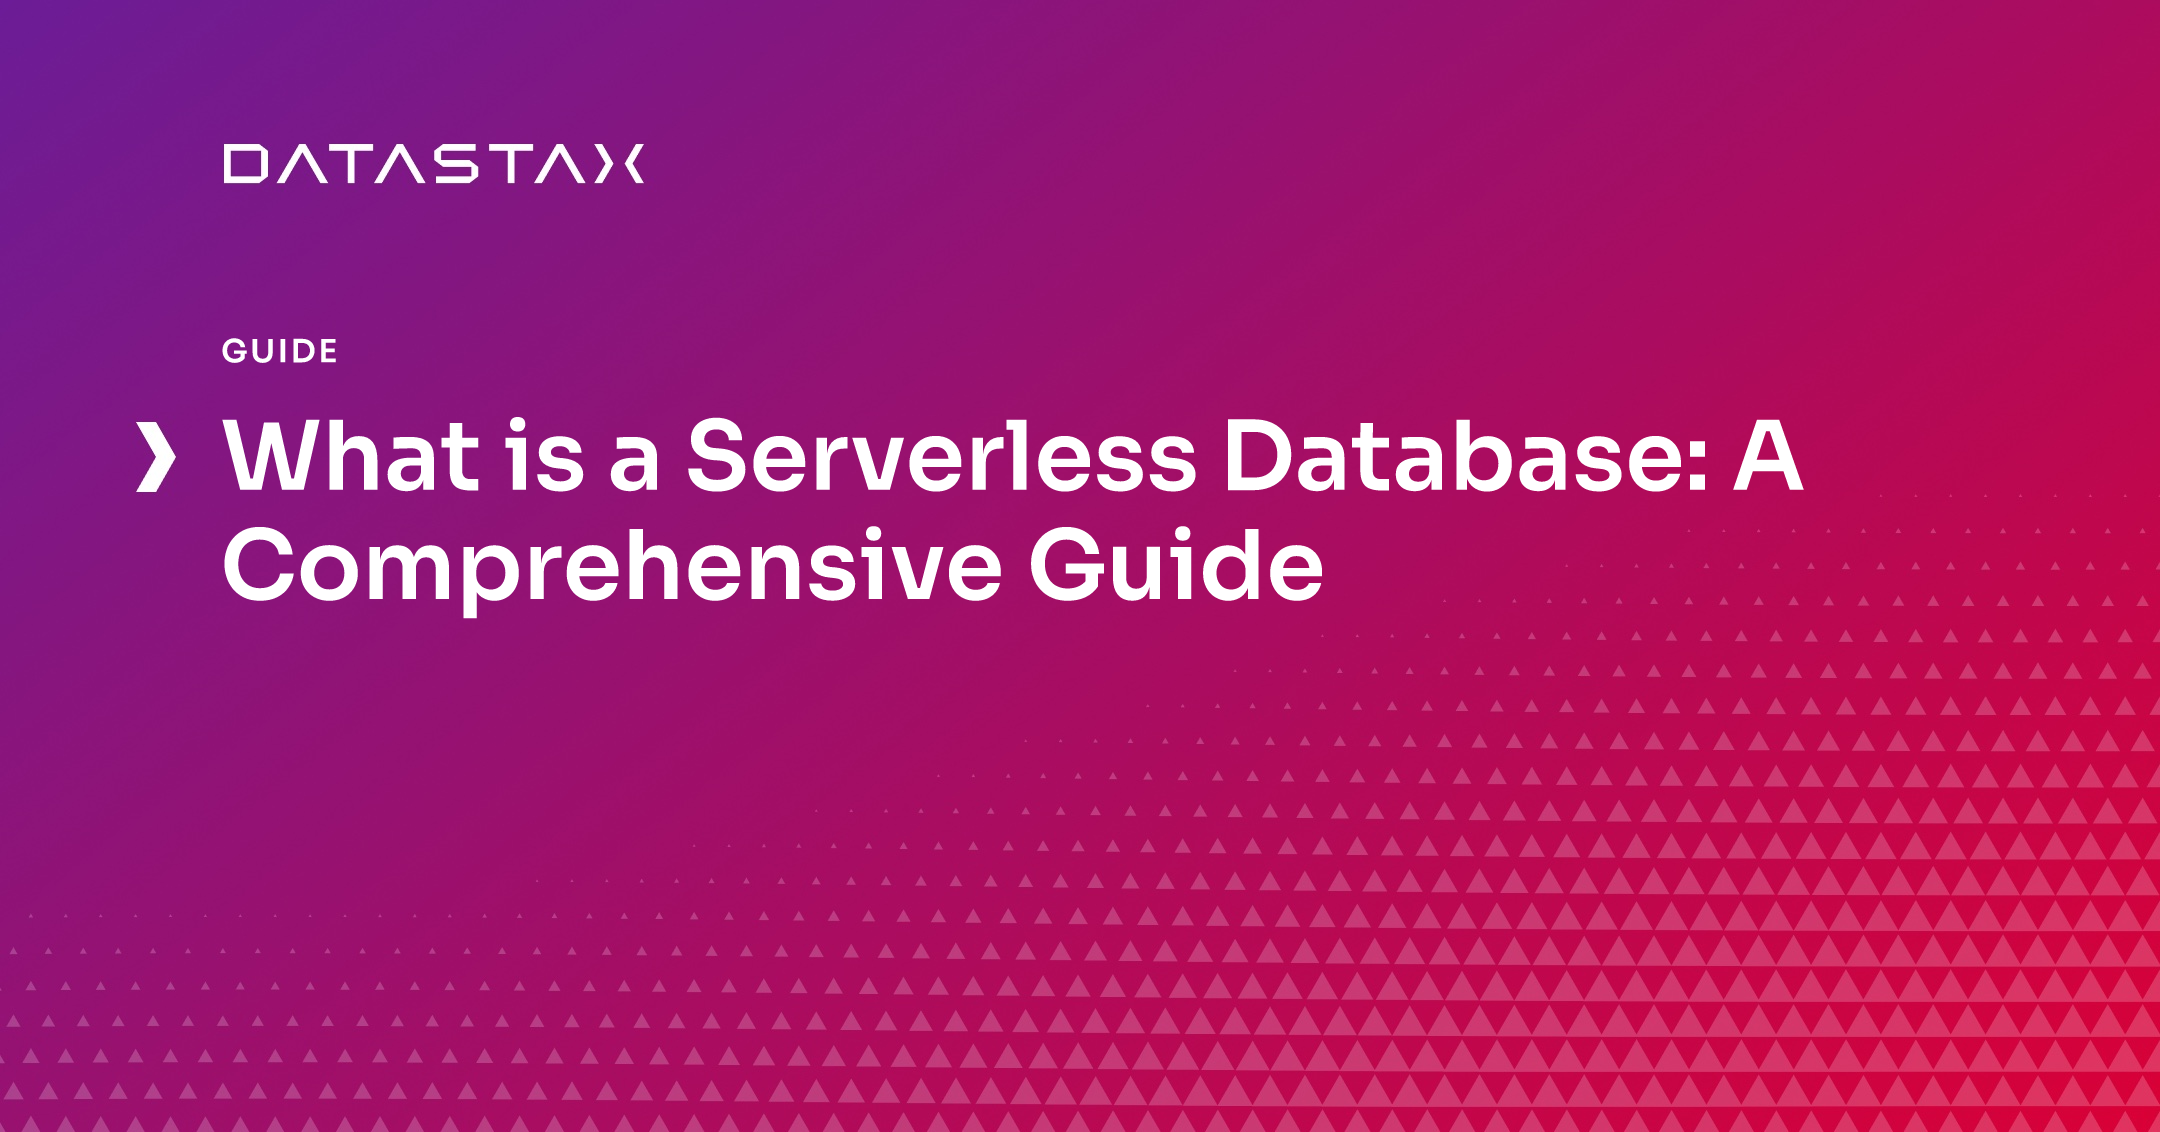 What is a Serverless Database: A Comprehensive Guide